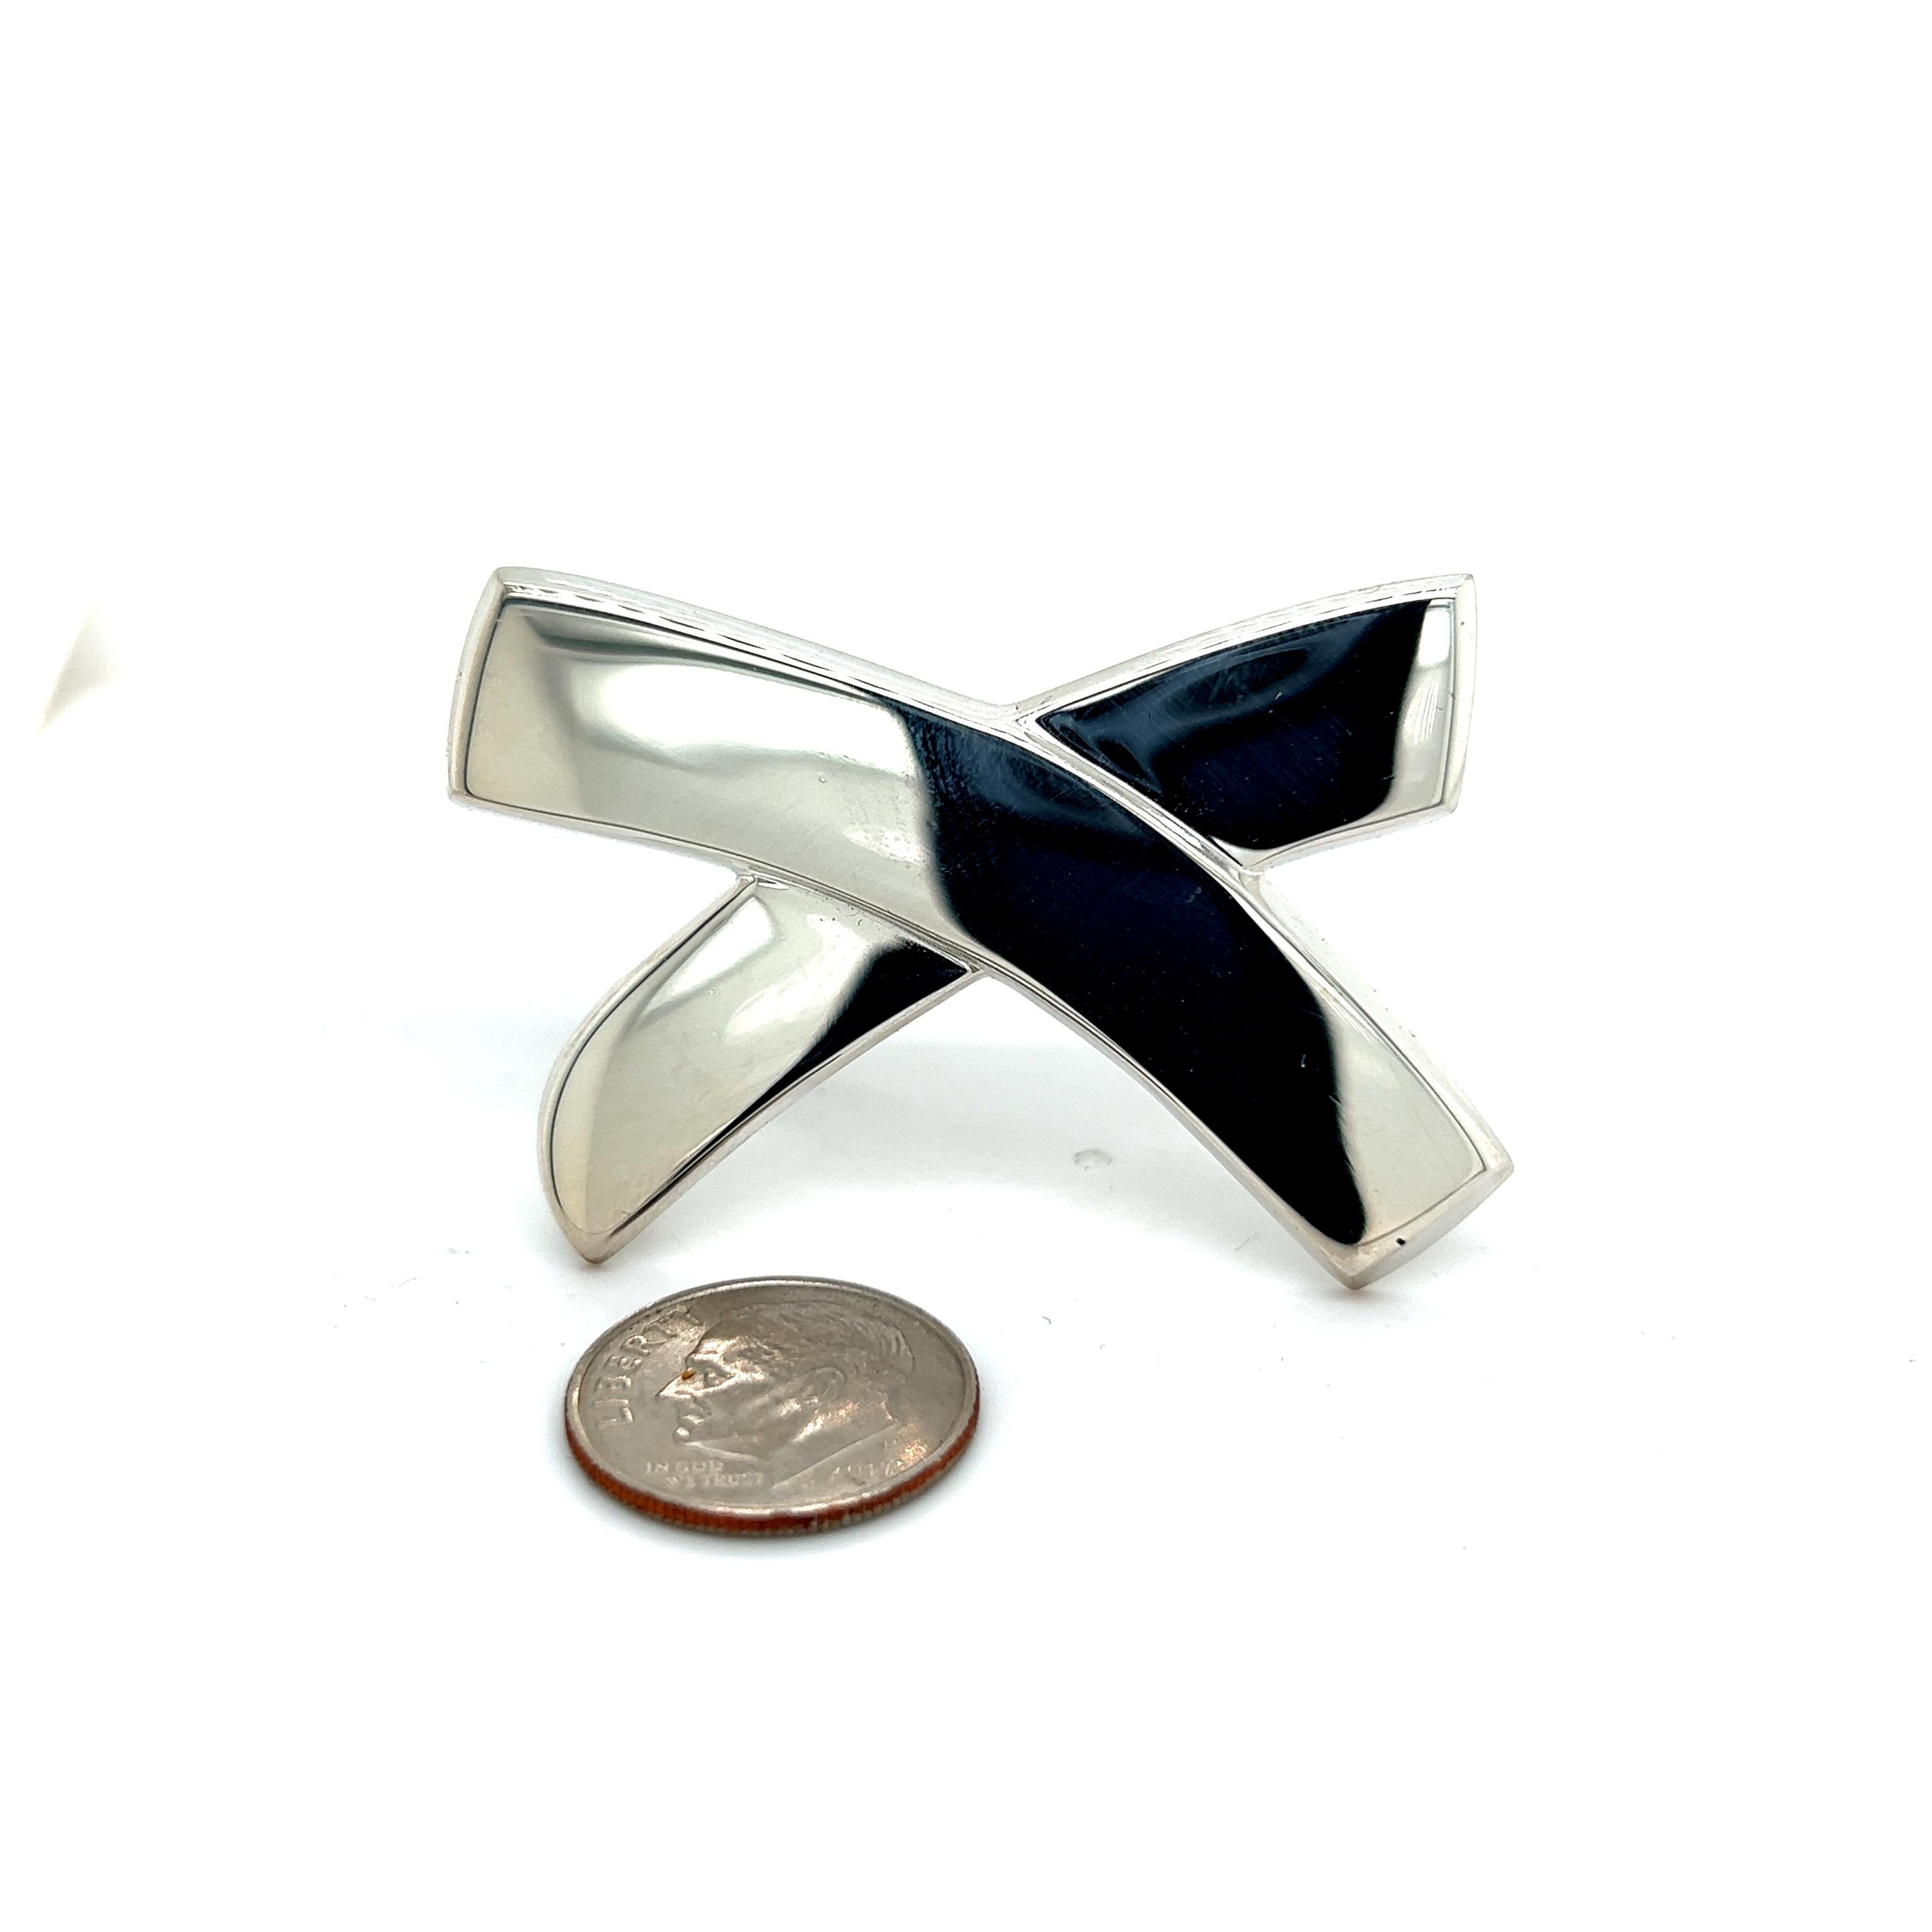 Tiffany & Co Estate Large X Brooch Pin Silver By Paloma Picasso TIF356

TRUSTED SELLER SINCE 2002

PLEASE SEE OUR HUNDREDS OF POSITIVE FEEDBACKS FROM OUR CLIENTS!!

FREE SHIPPING
Grams: 11
Shape: Large X Brooch Pin
By: Paloma Picasso
Material: